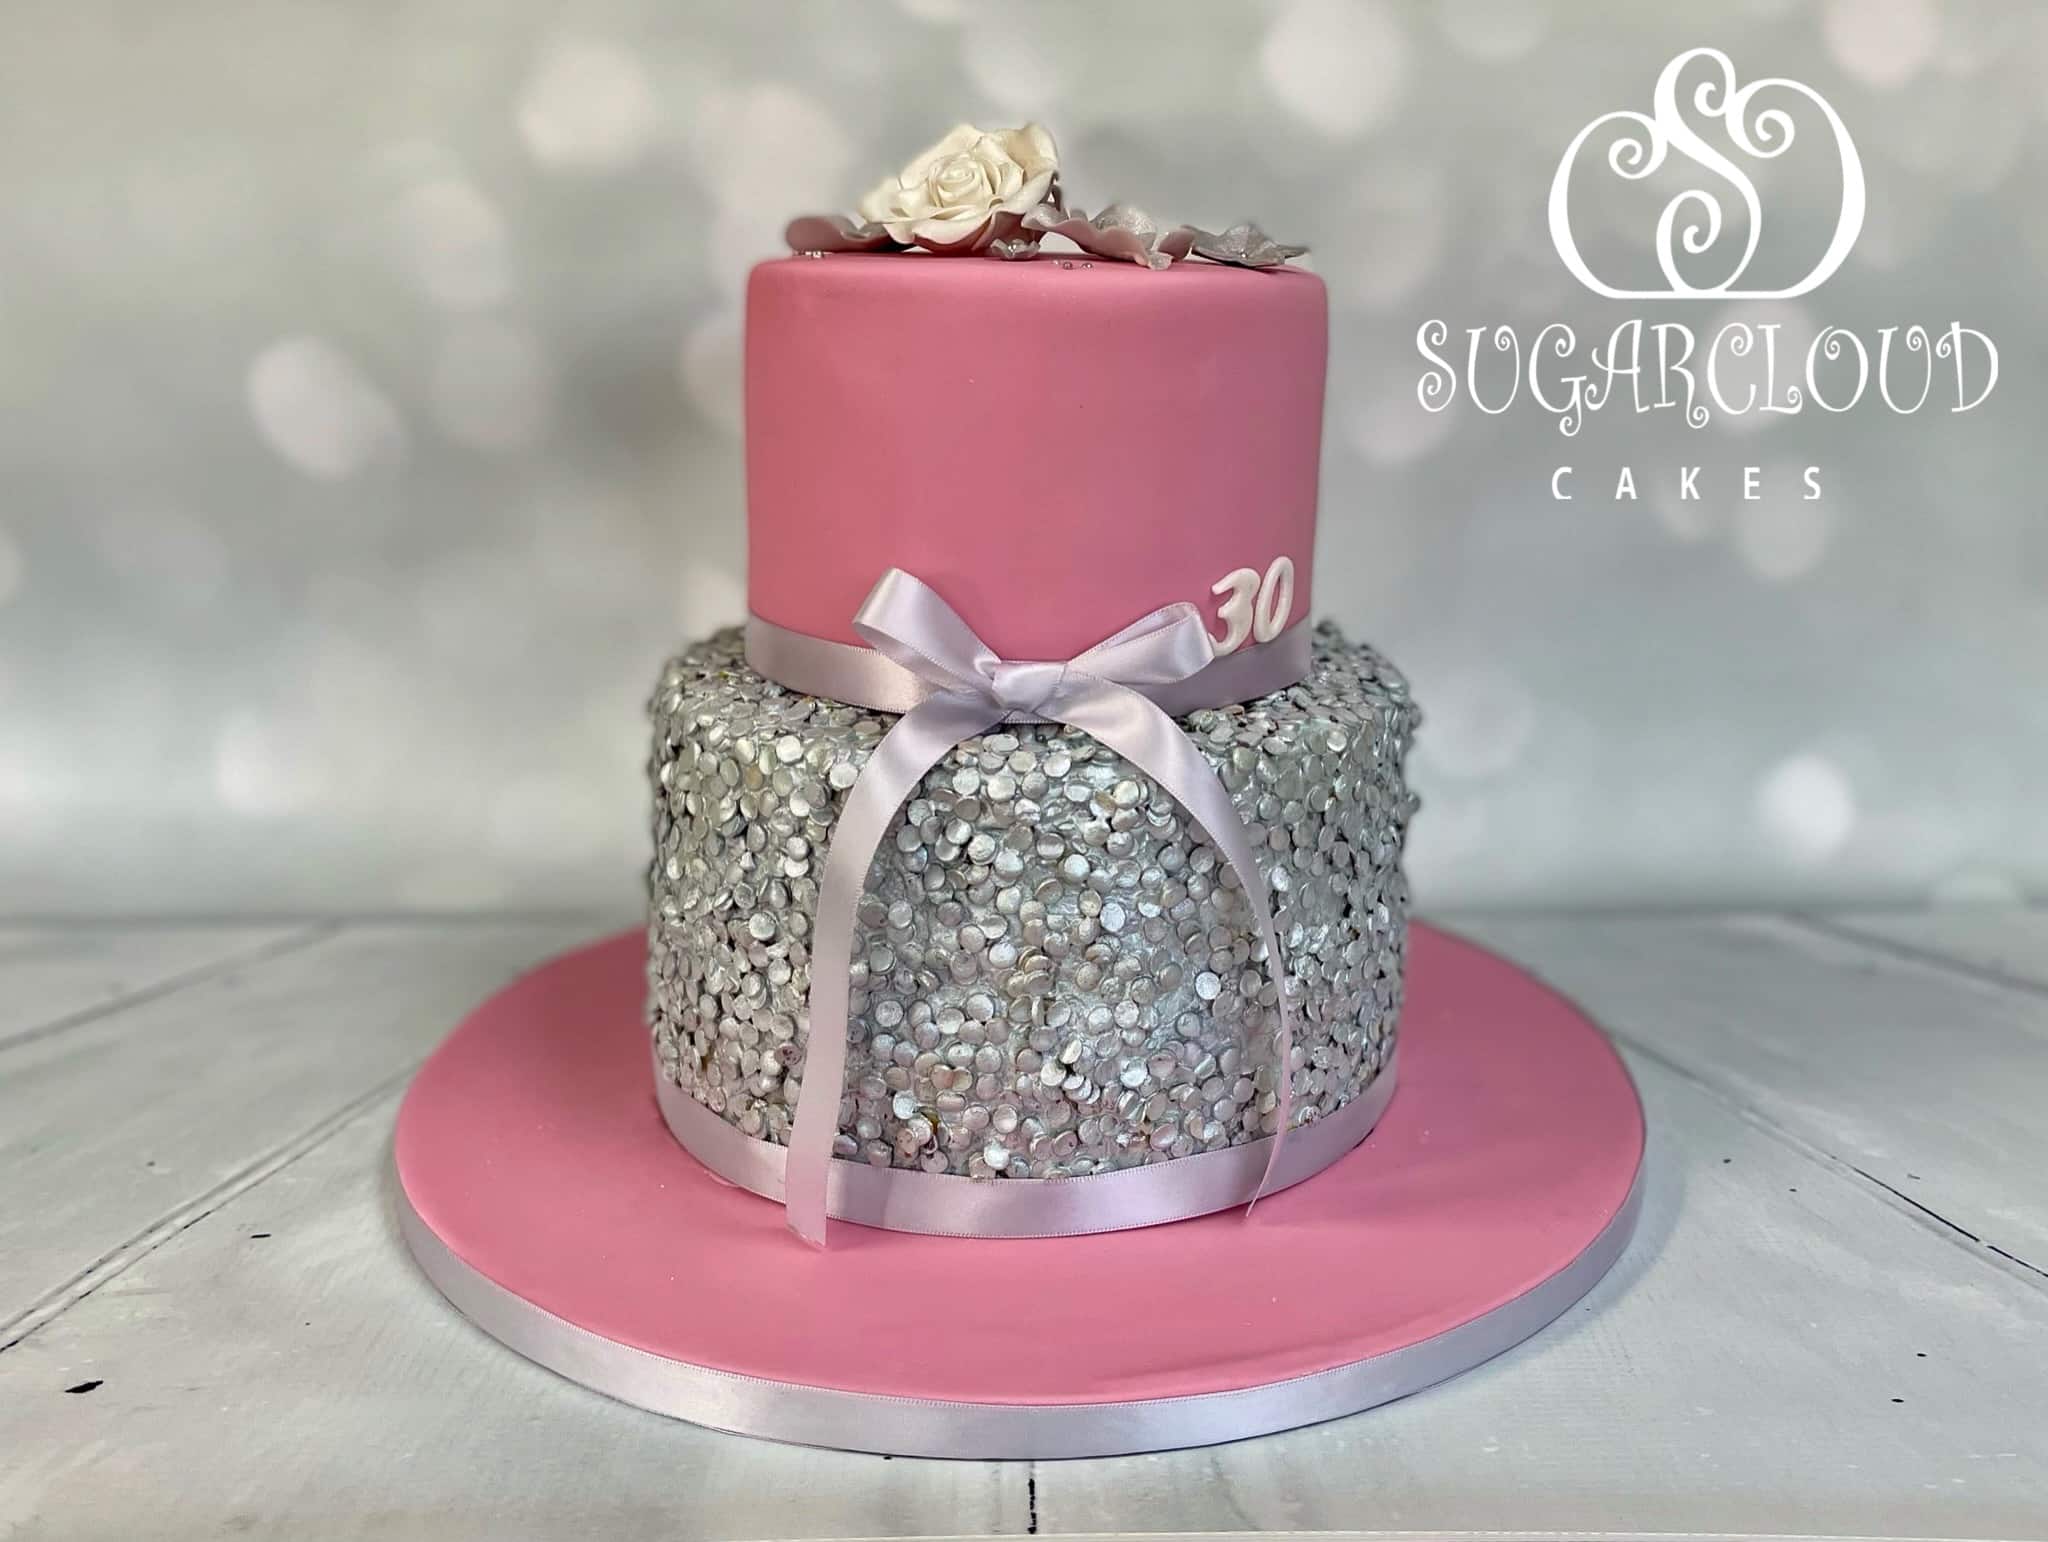 A Pink and Silver Themed 30th Birthday Cake, Nantwich